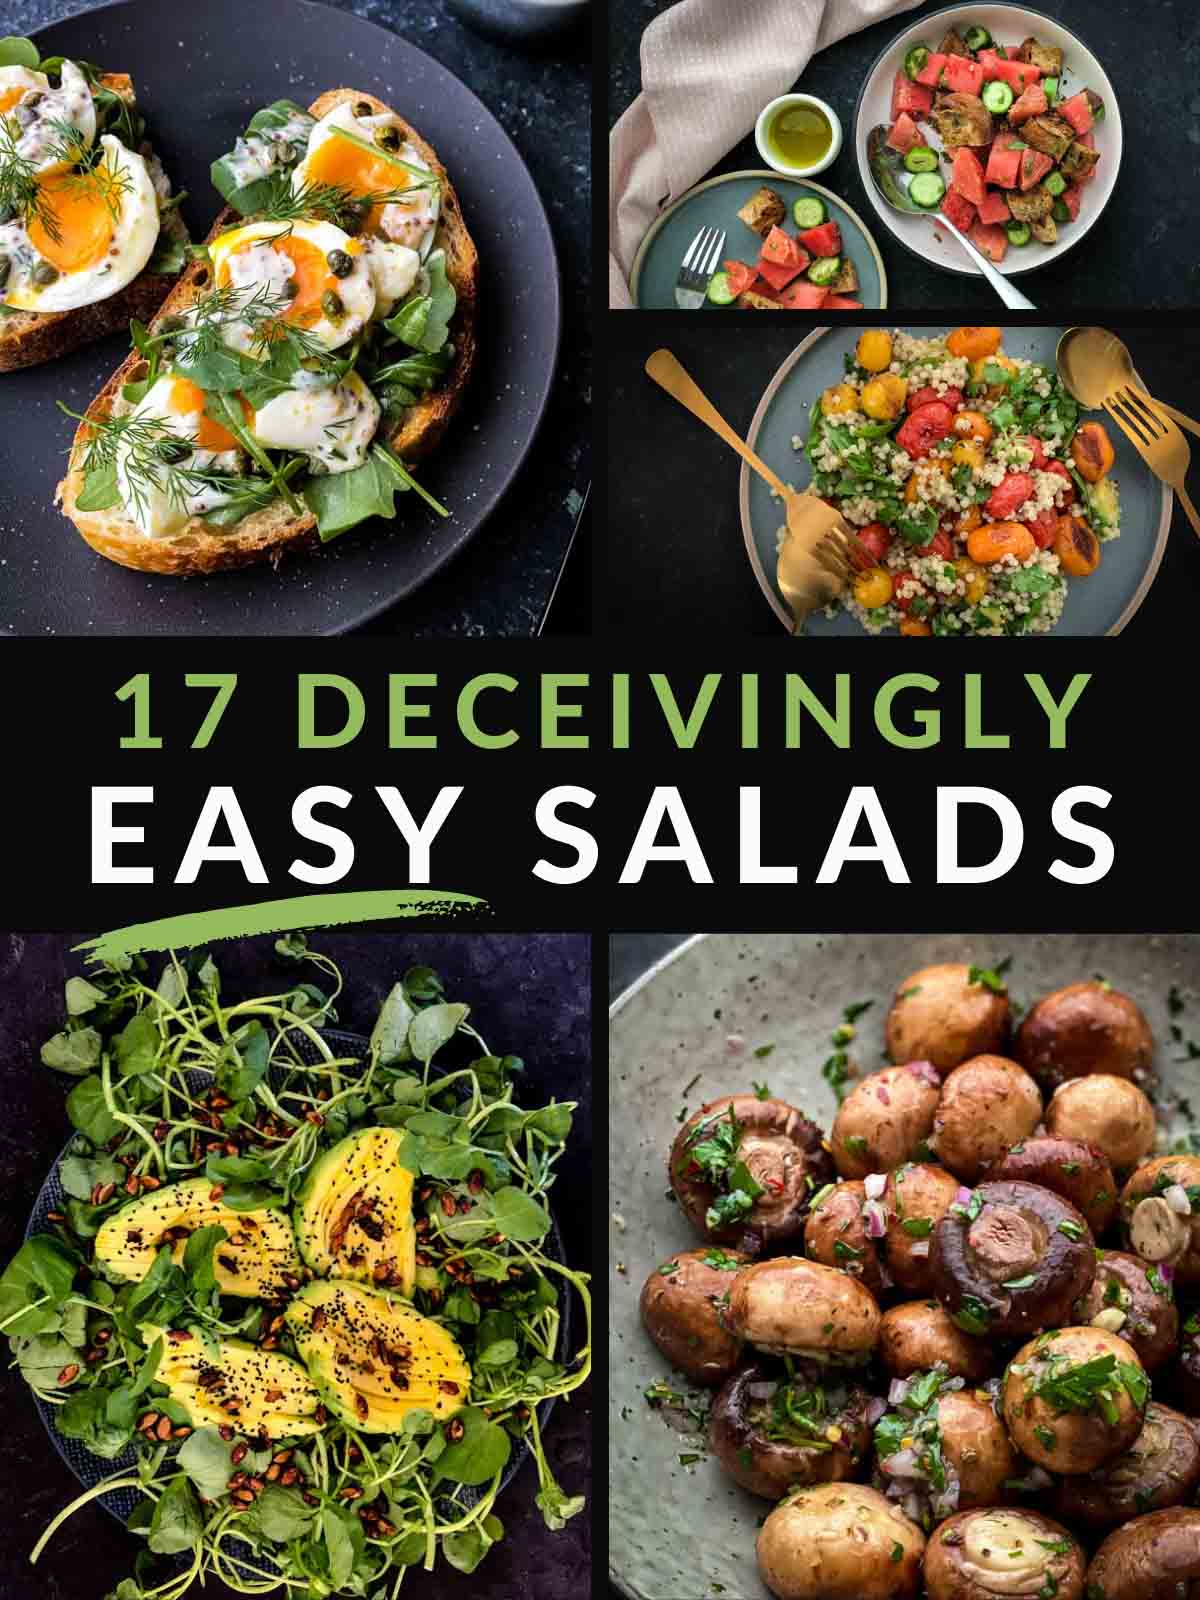 Collage of 5 photos for Deceivingly Easy Salads